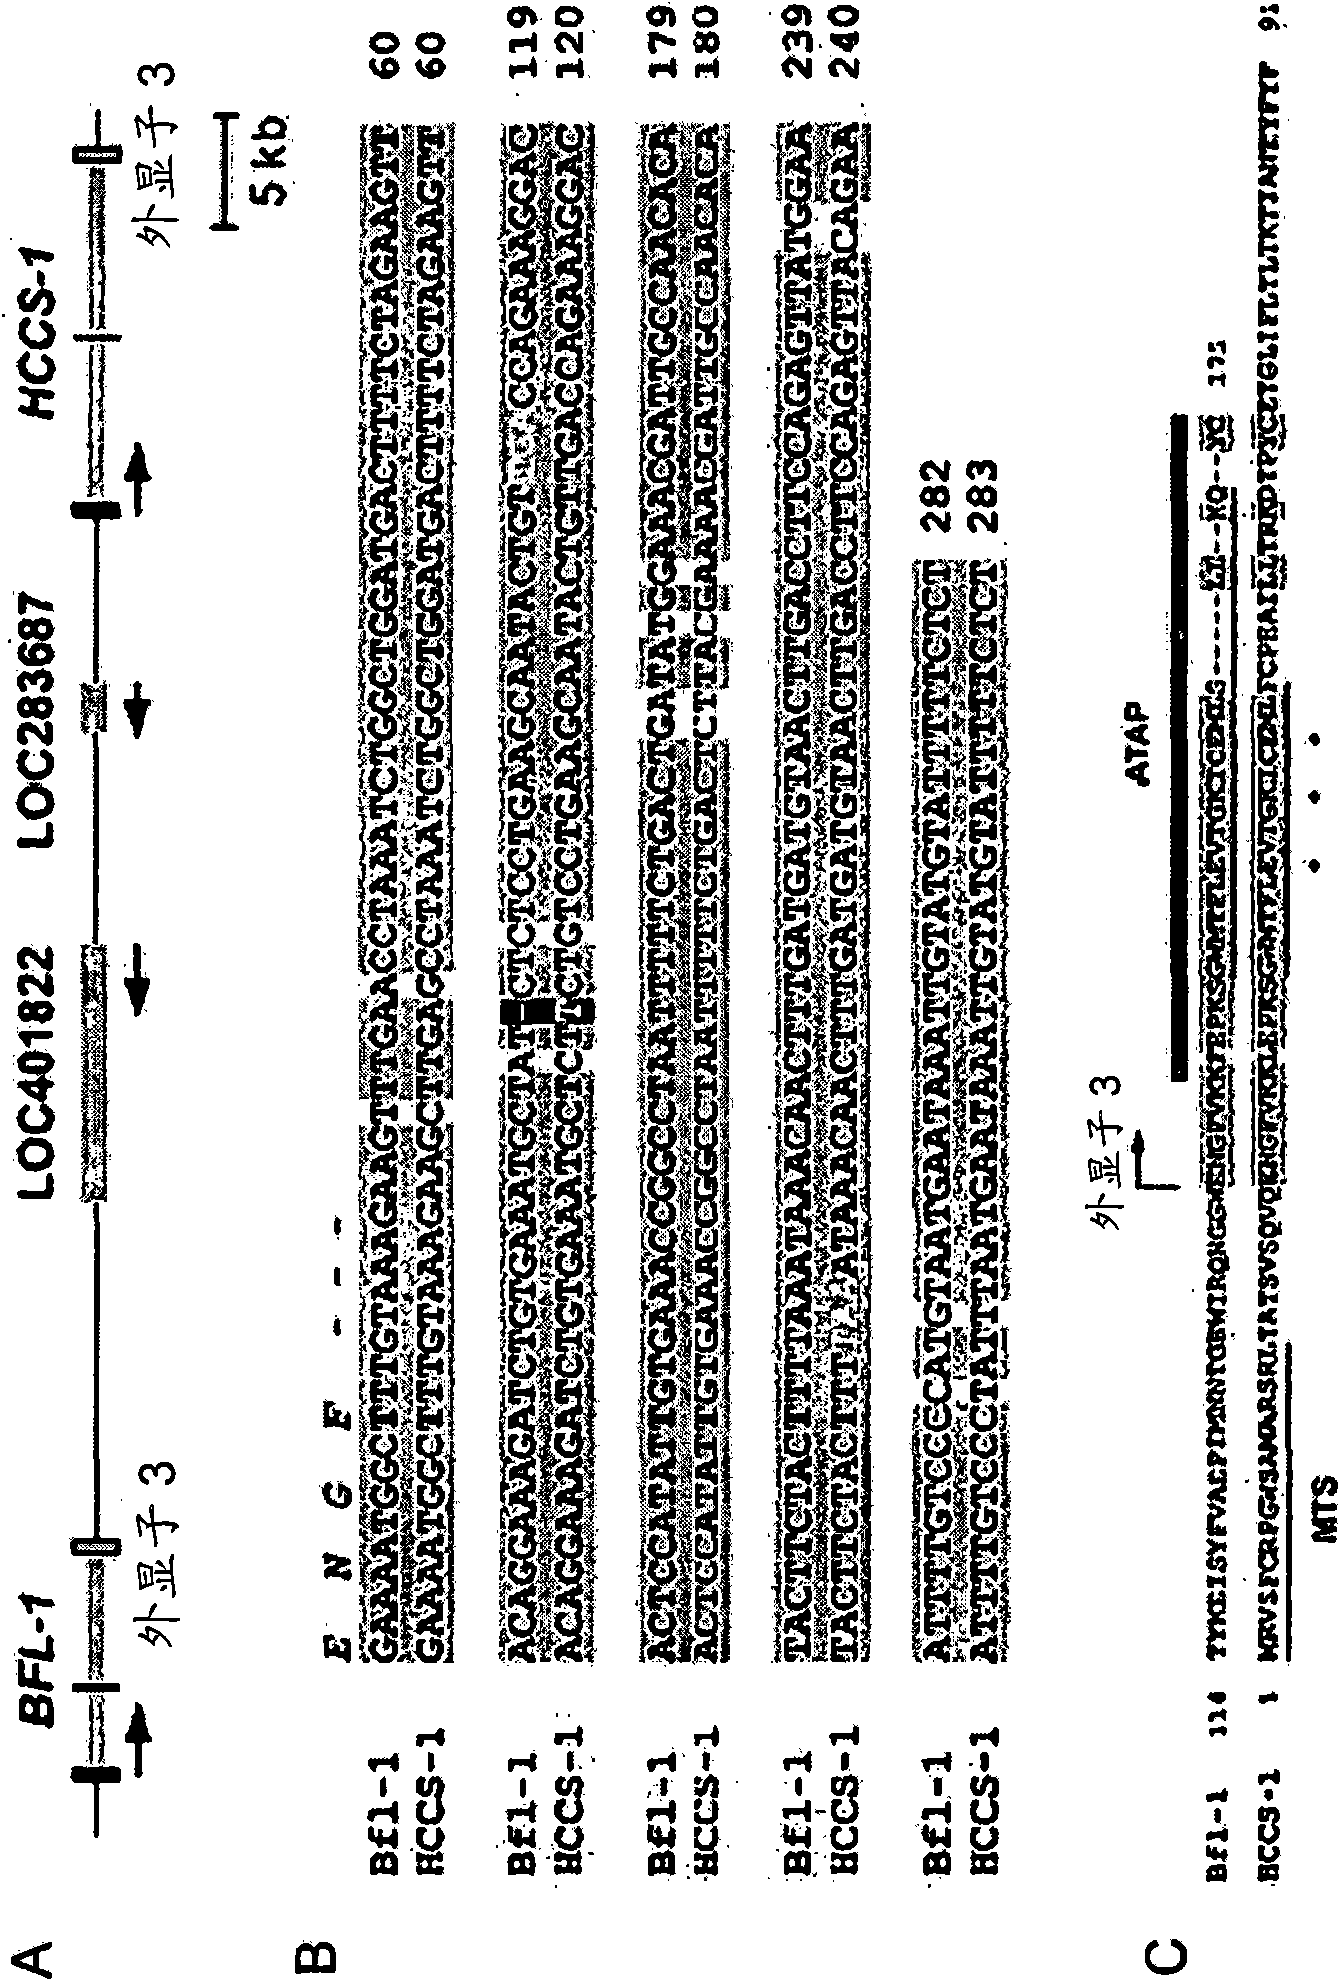 Atap peptides, nucleic acids encoding the same and associated methods of use